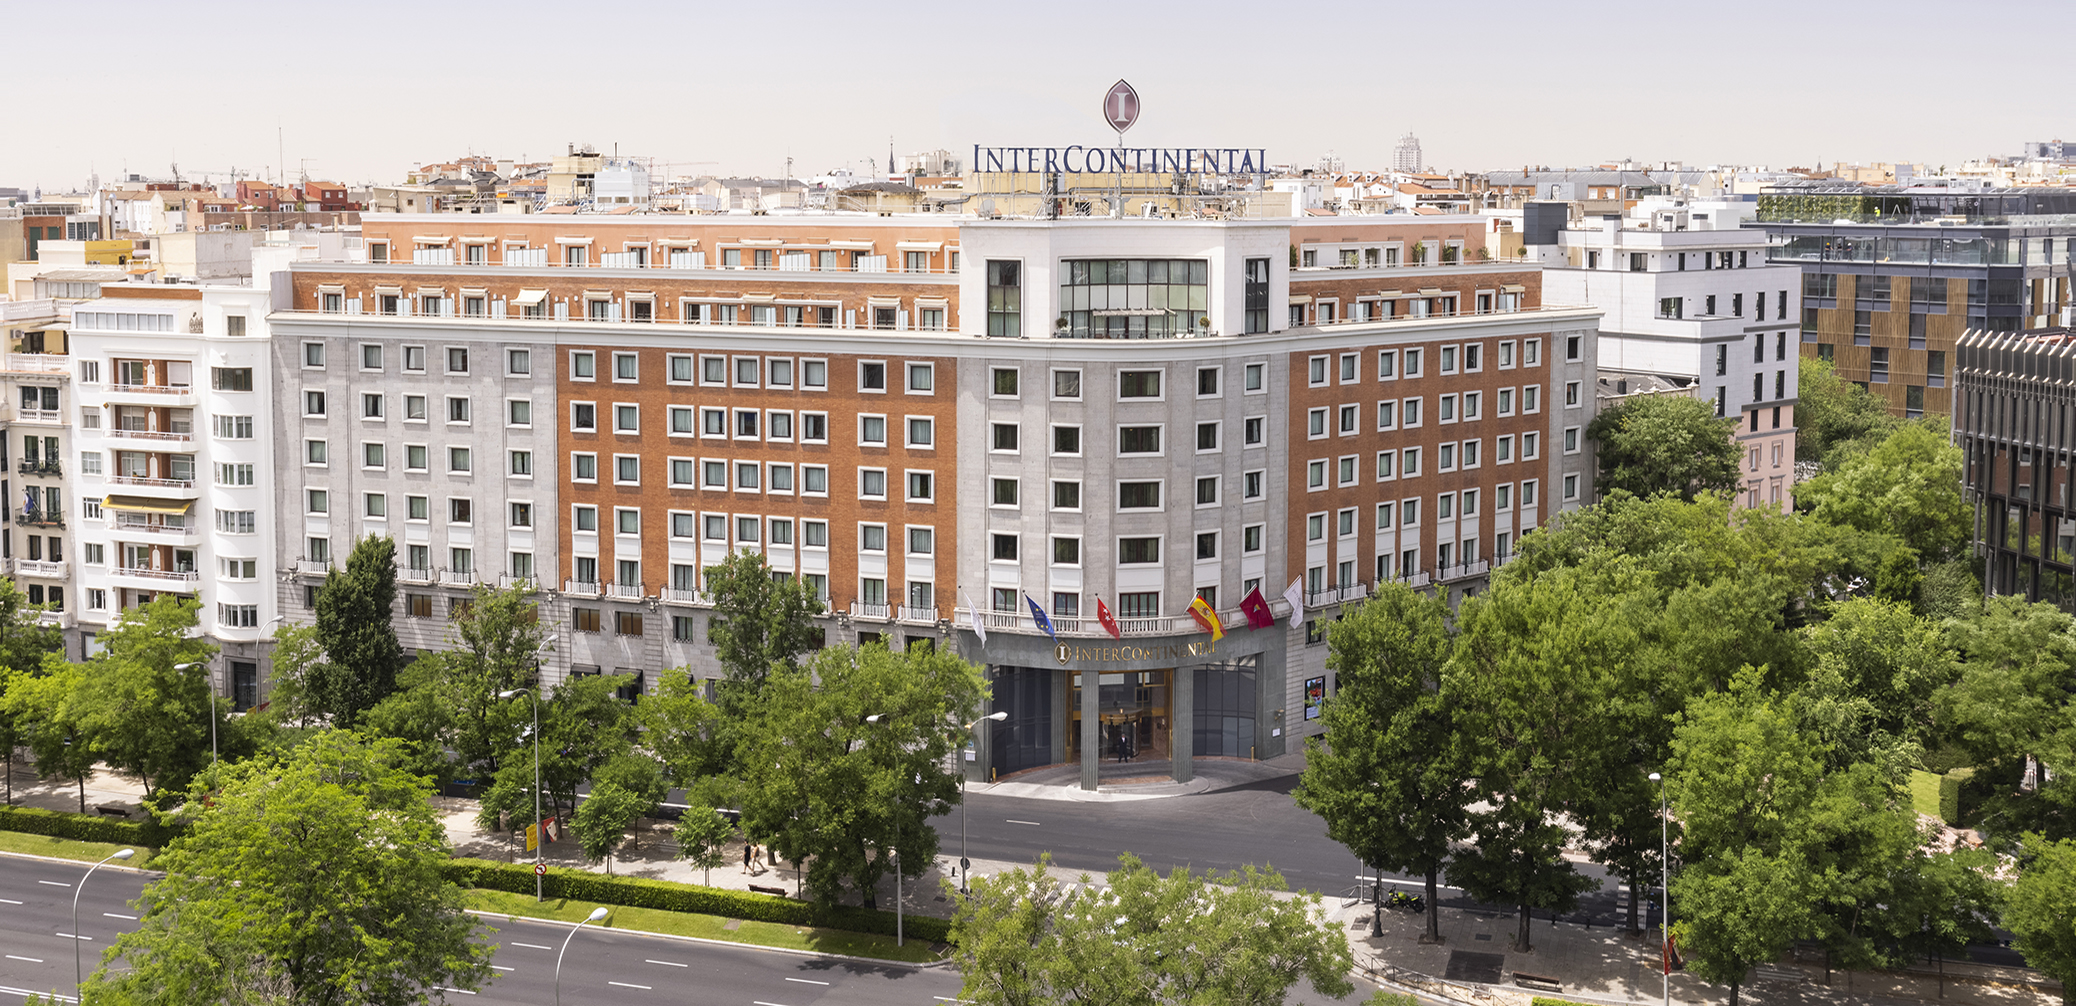 Review: InterContinental Madrid